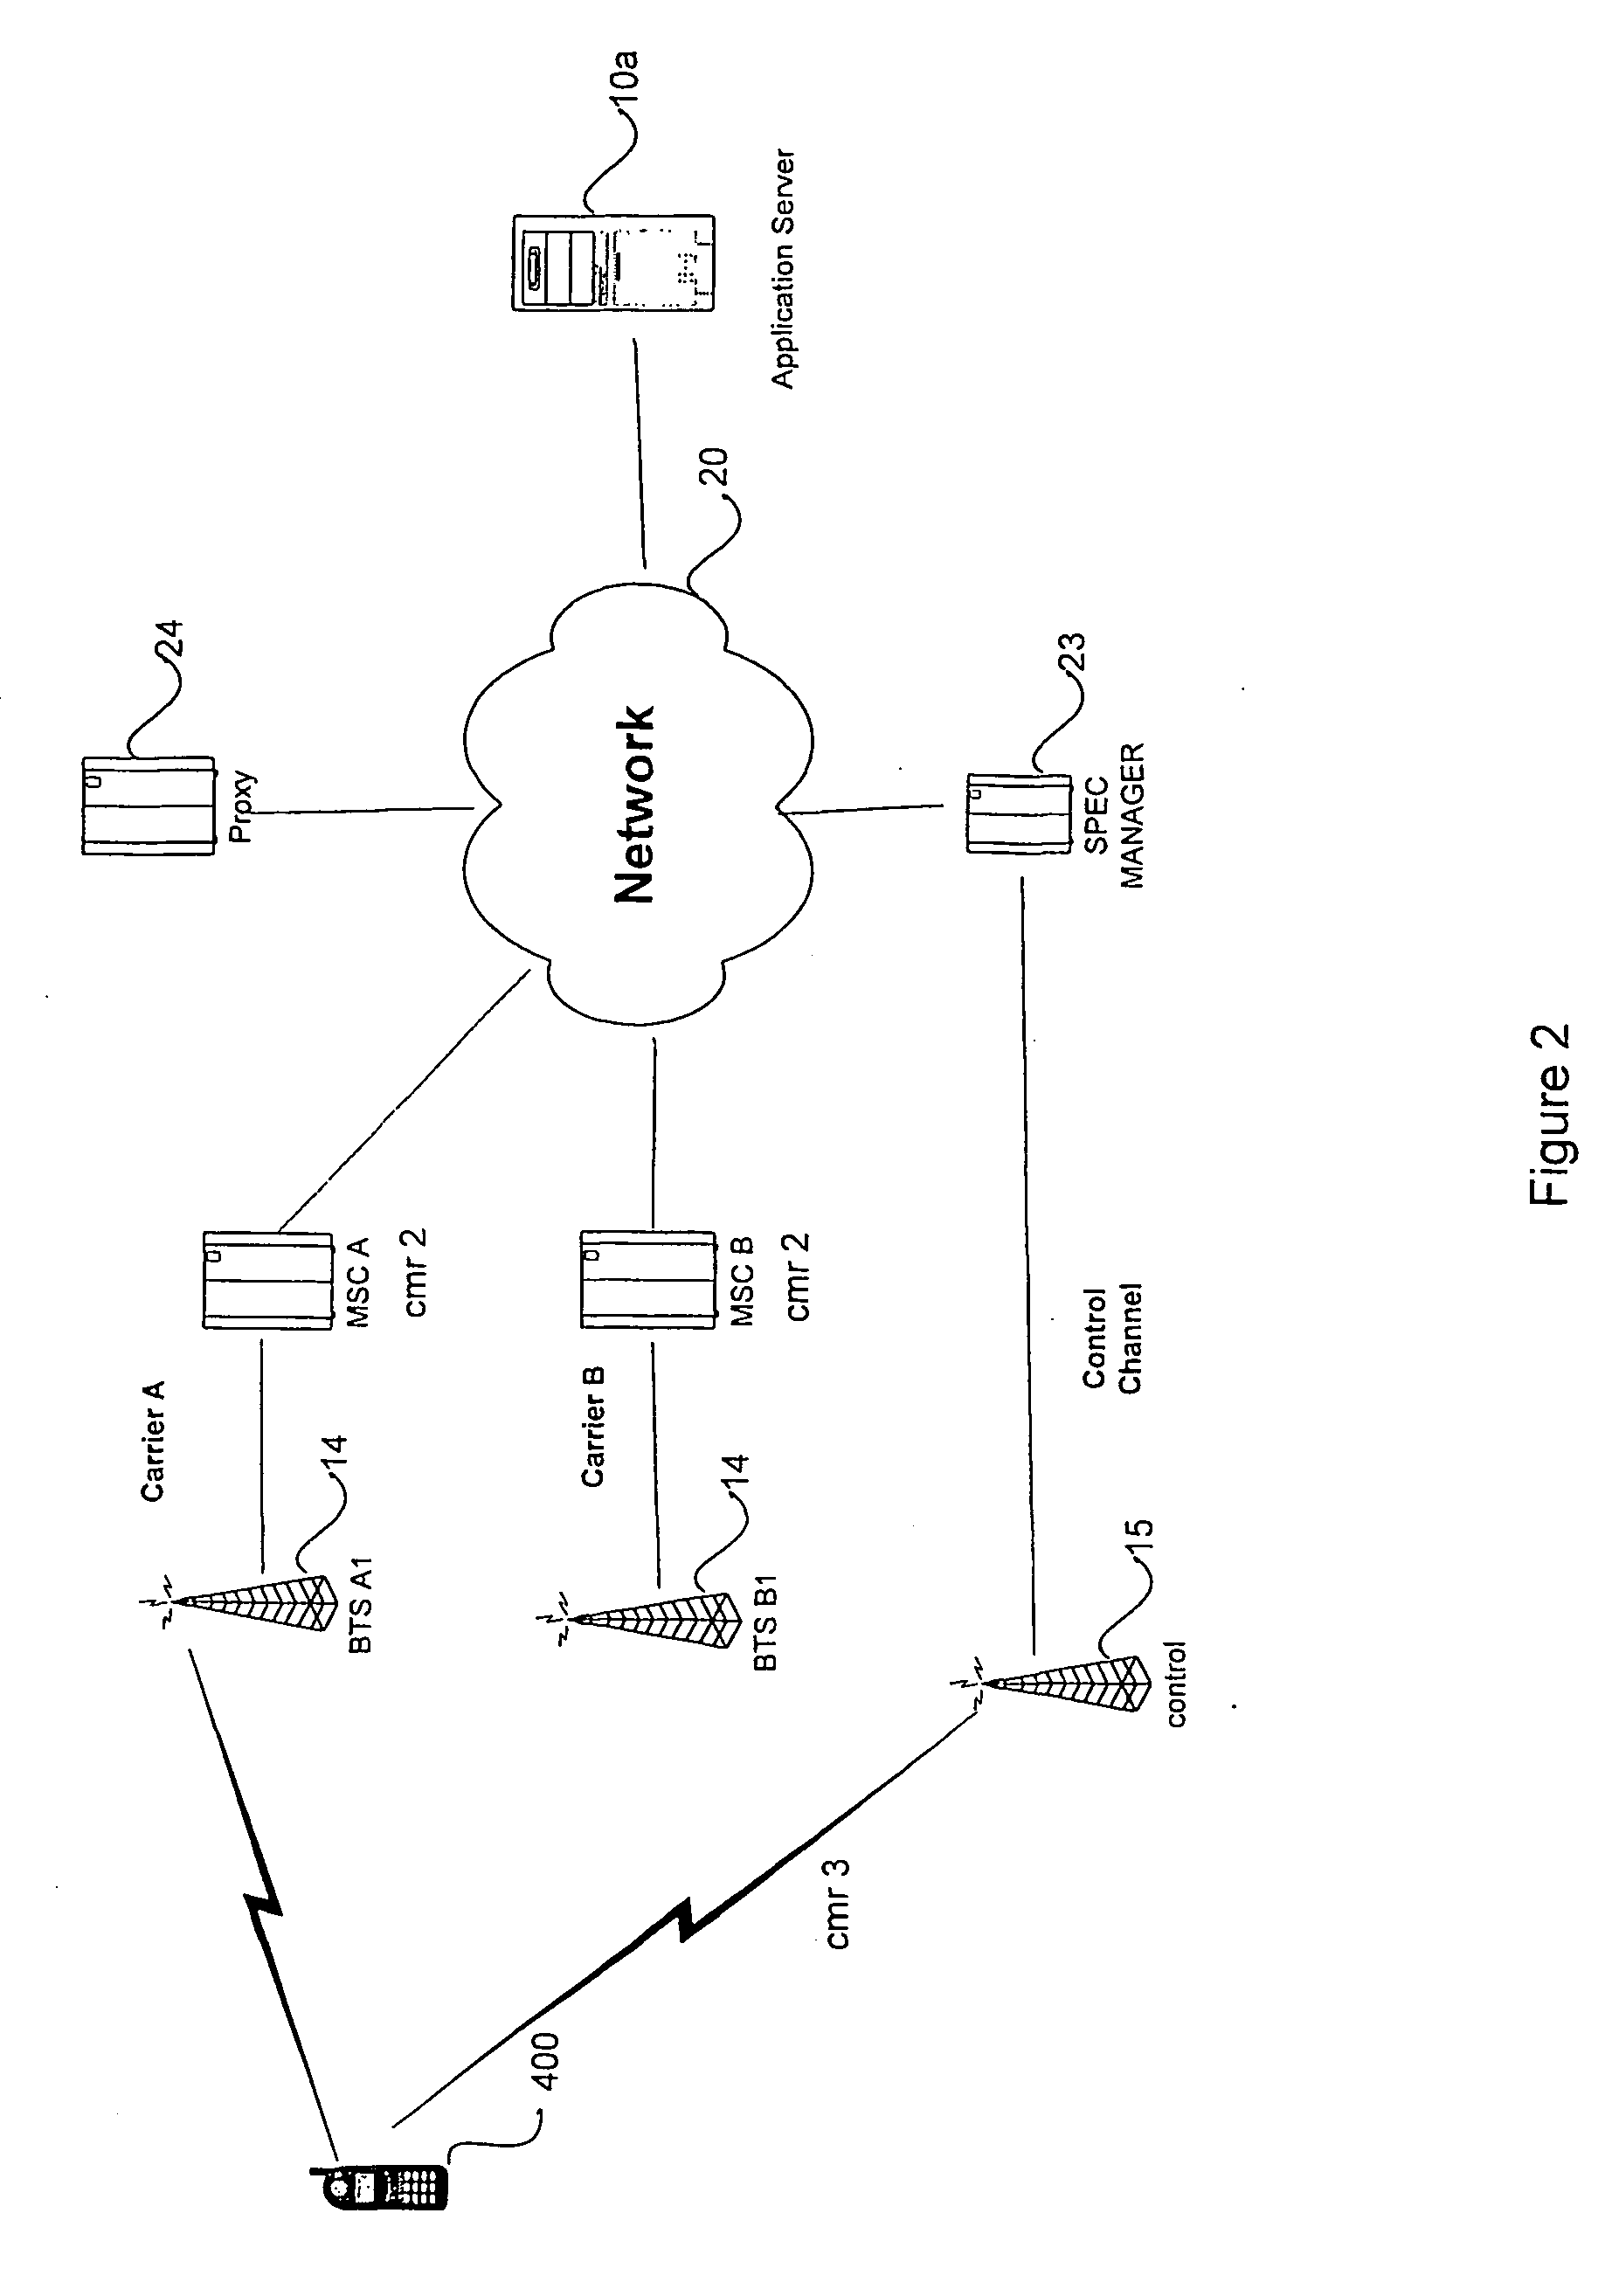 Method and system for dynamic spectrum allocation and management